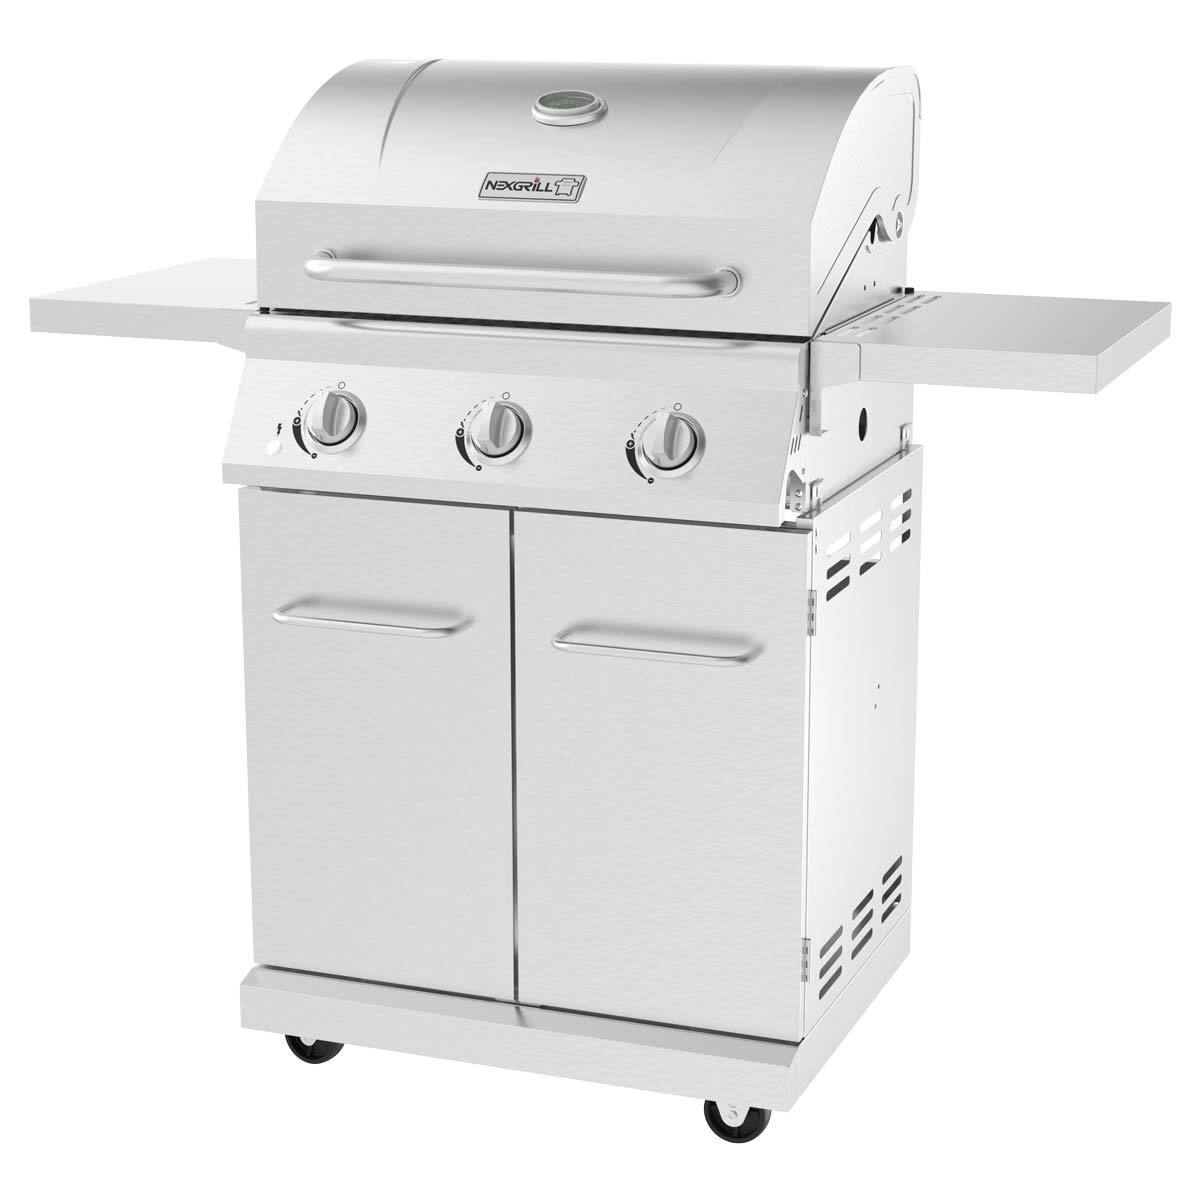 Nexgrill 3 Burner Stainless Steel Gas Barbecue + Cover - Signature Retail Stores